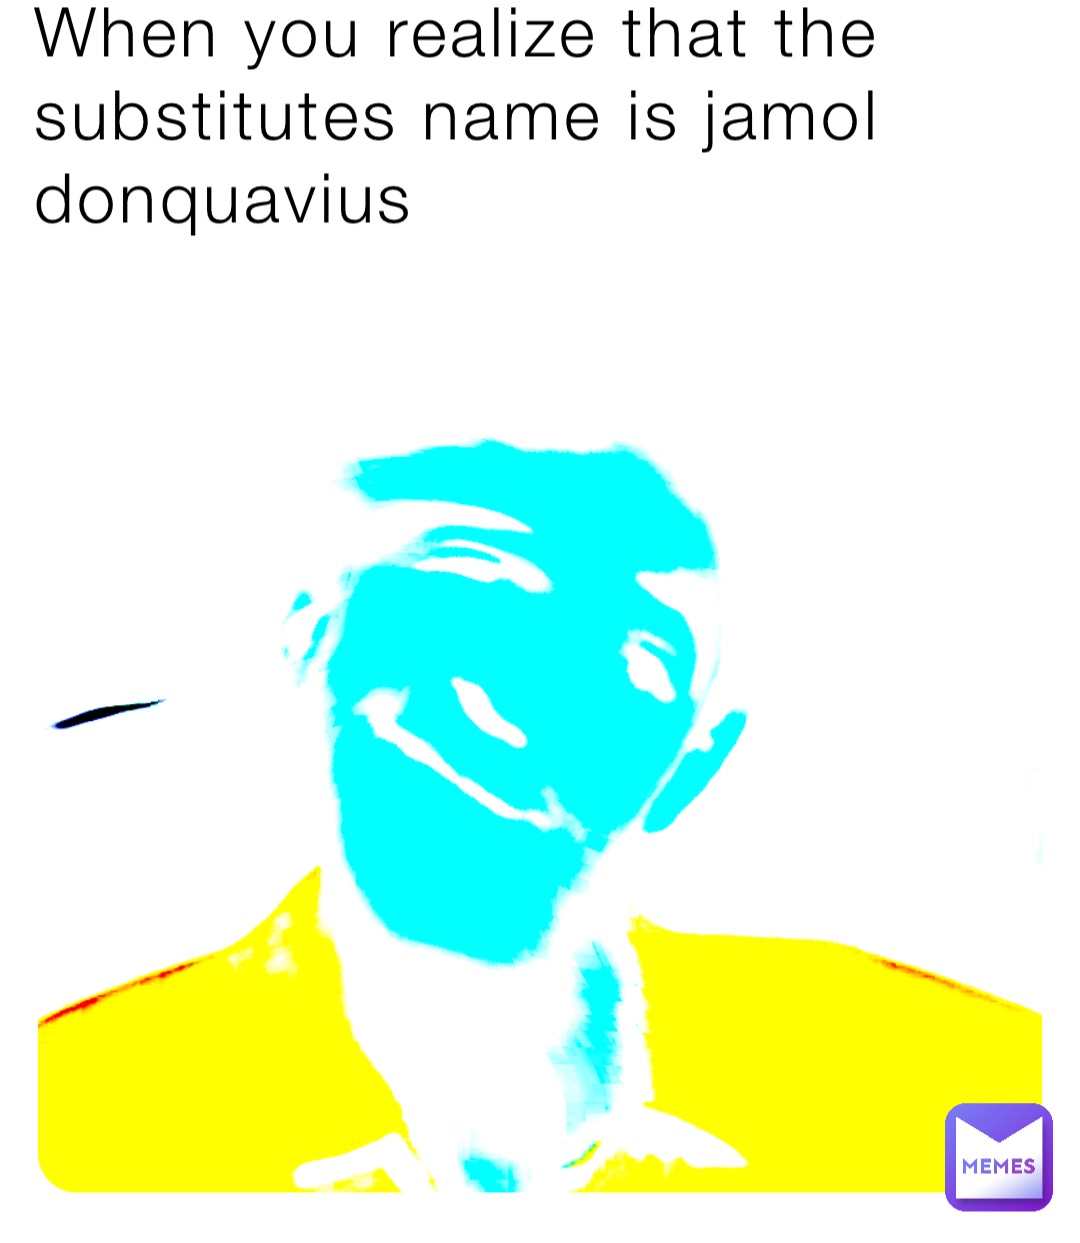 When you realize that the substitutes name is jamol donquavius